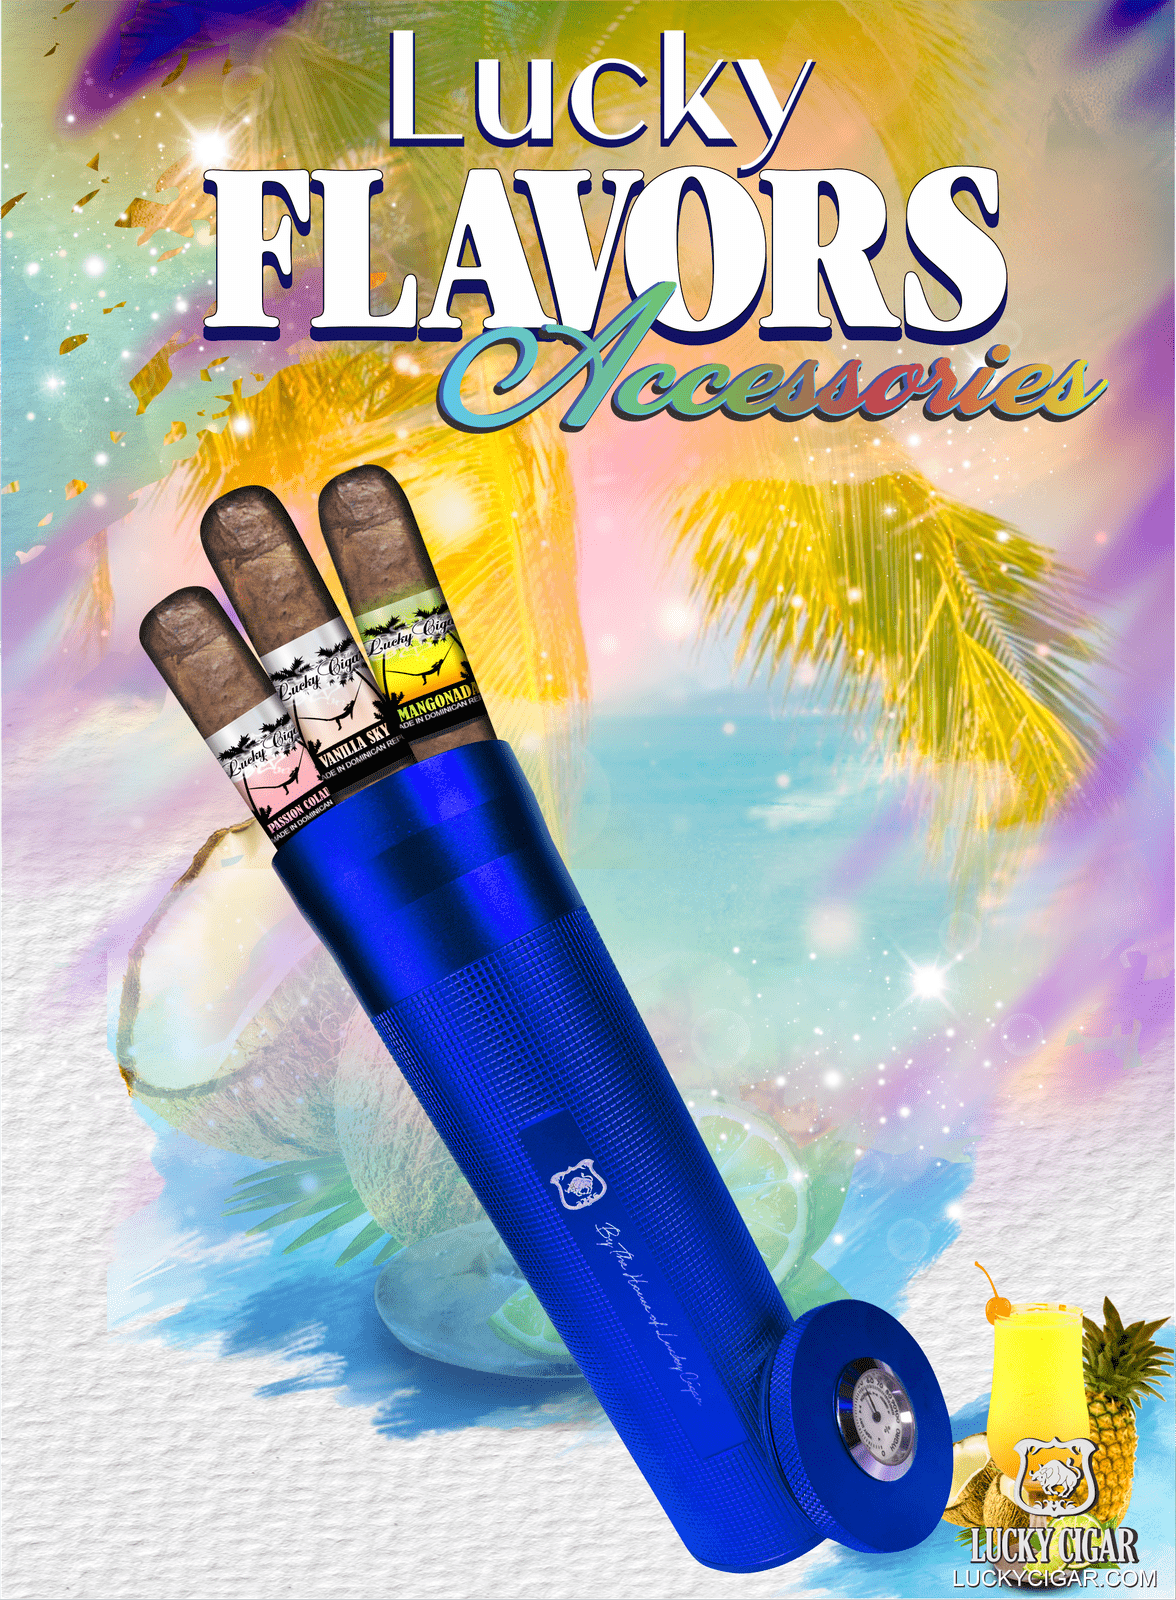 Flavored Cigars: Lucky Flavors 3 Cigar Set with Blue Travel Humidor